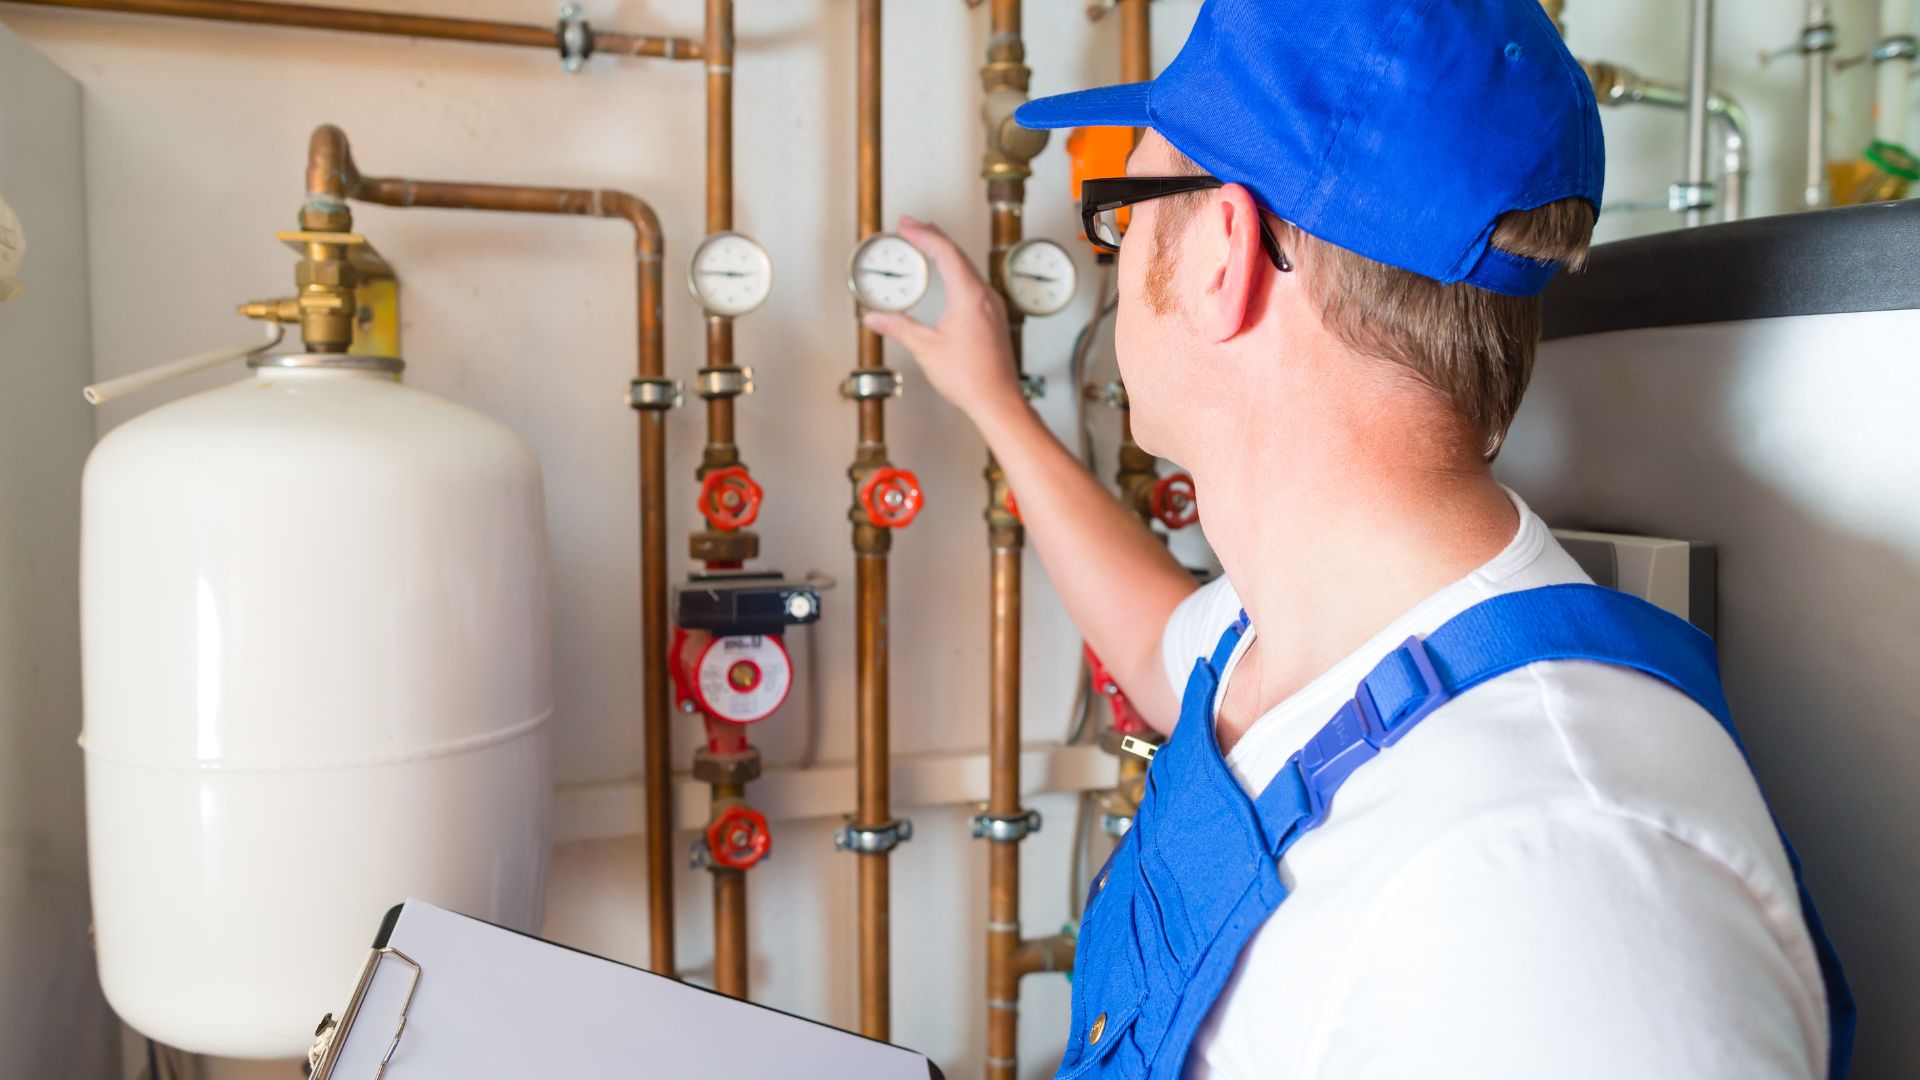 Discover Rebates and Incentive Programs for Hot Water Tanks, Supported by Professional Plumbers